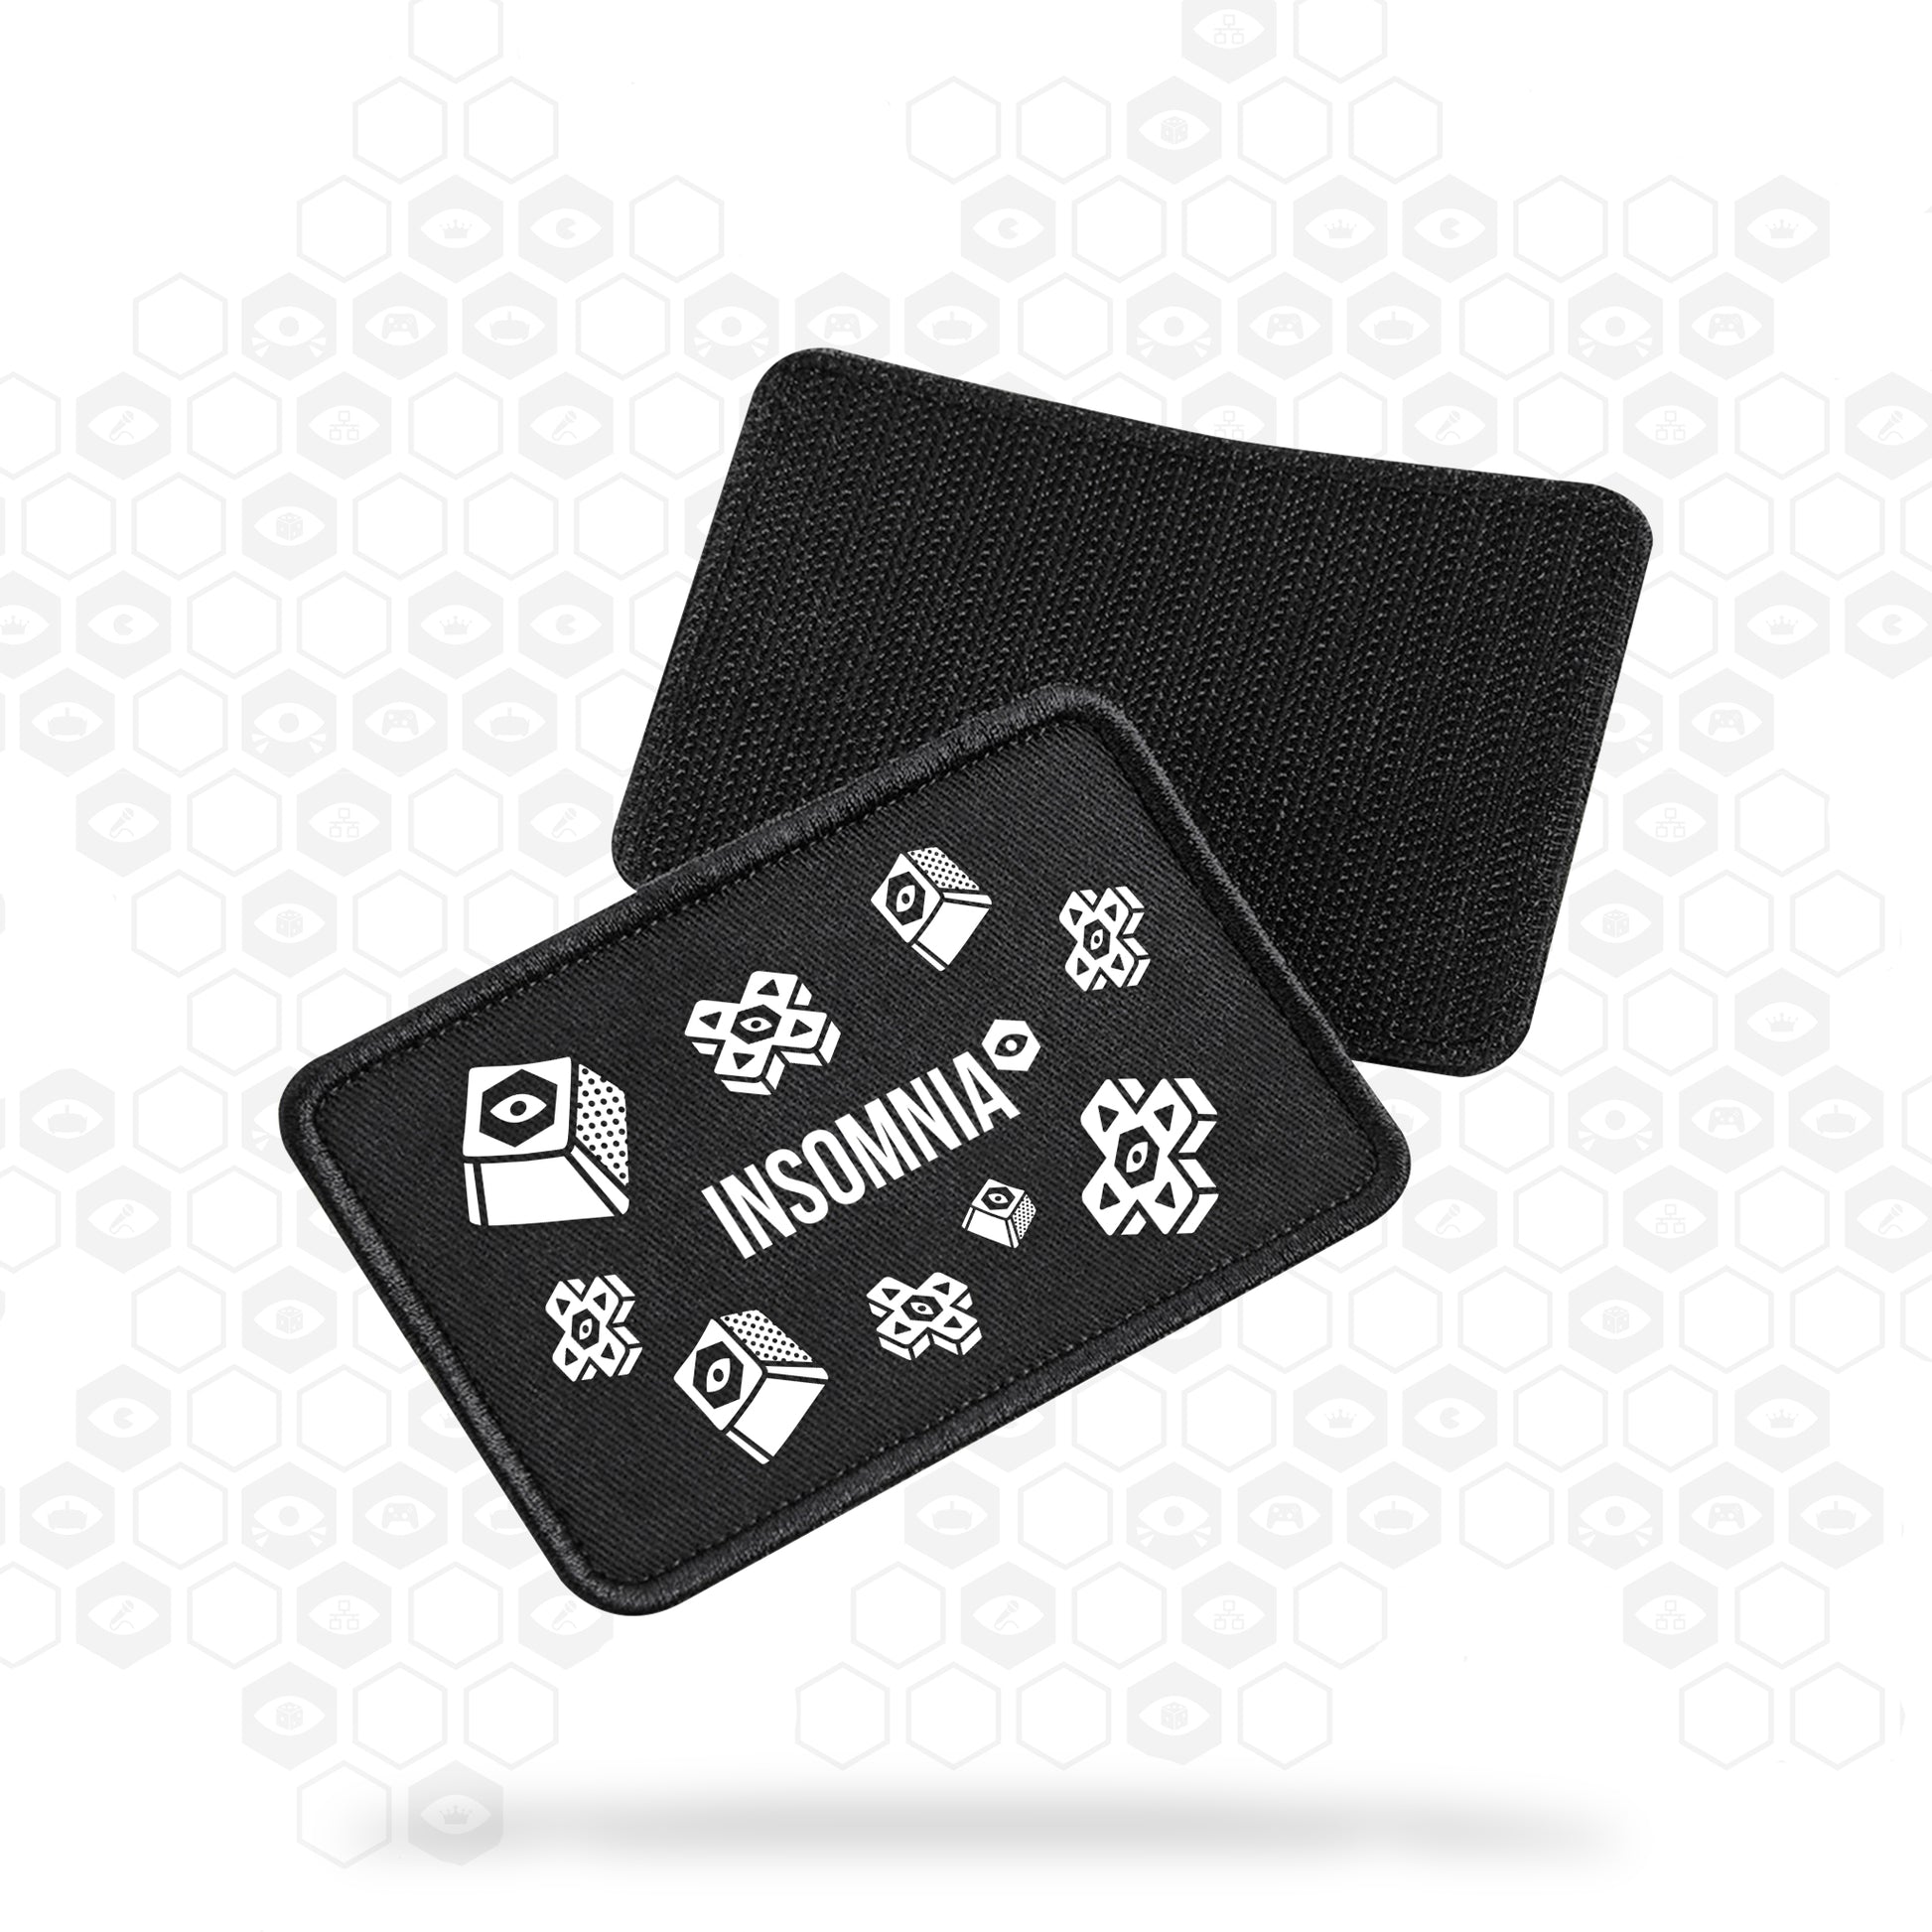 i69 buttons velcro patch for trucker cap | Insomnia Gaming Festival